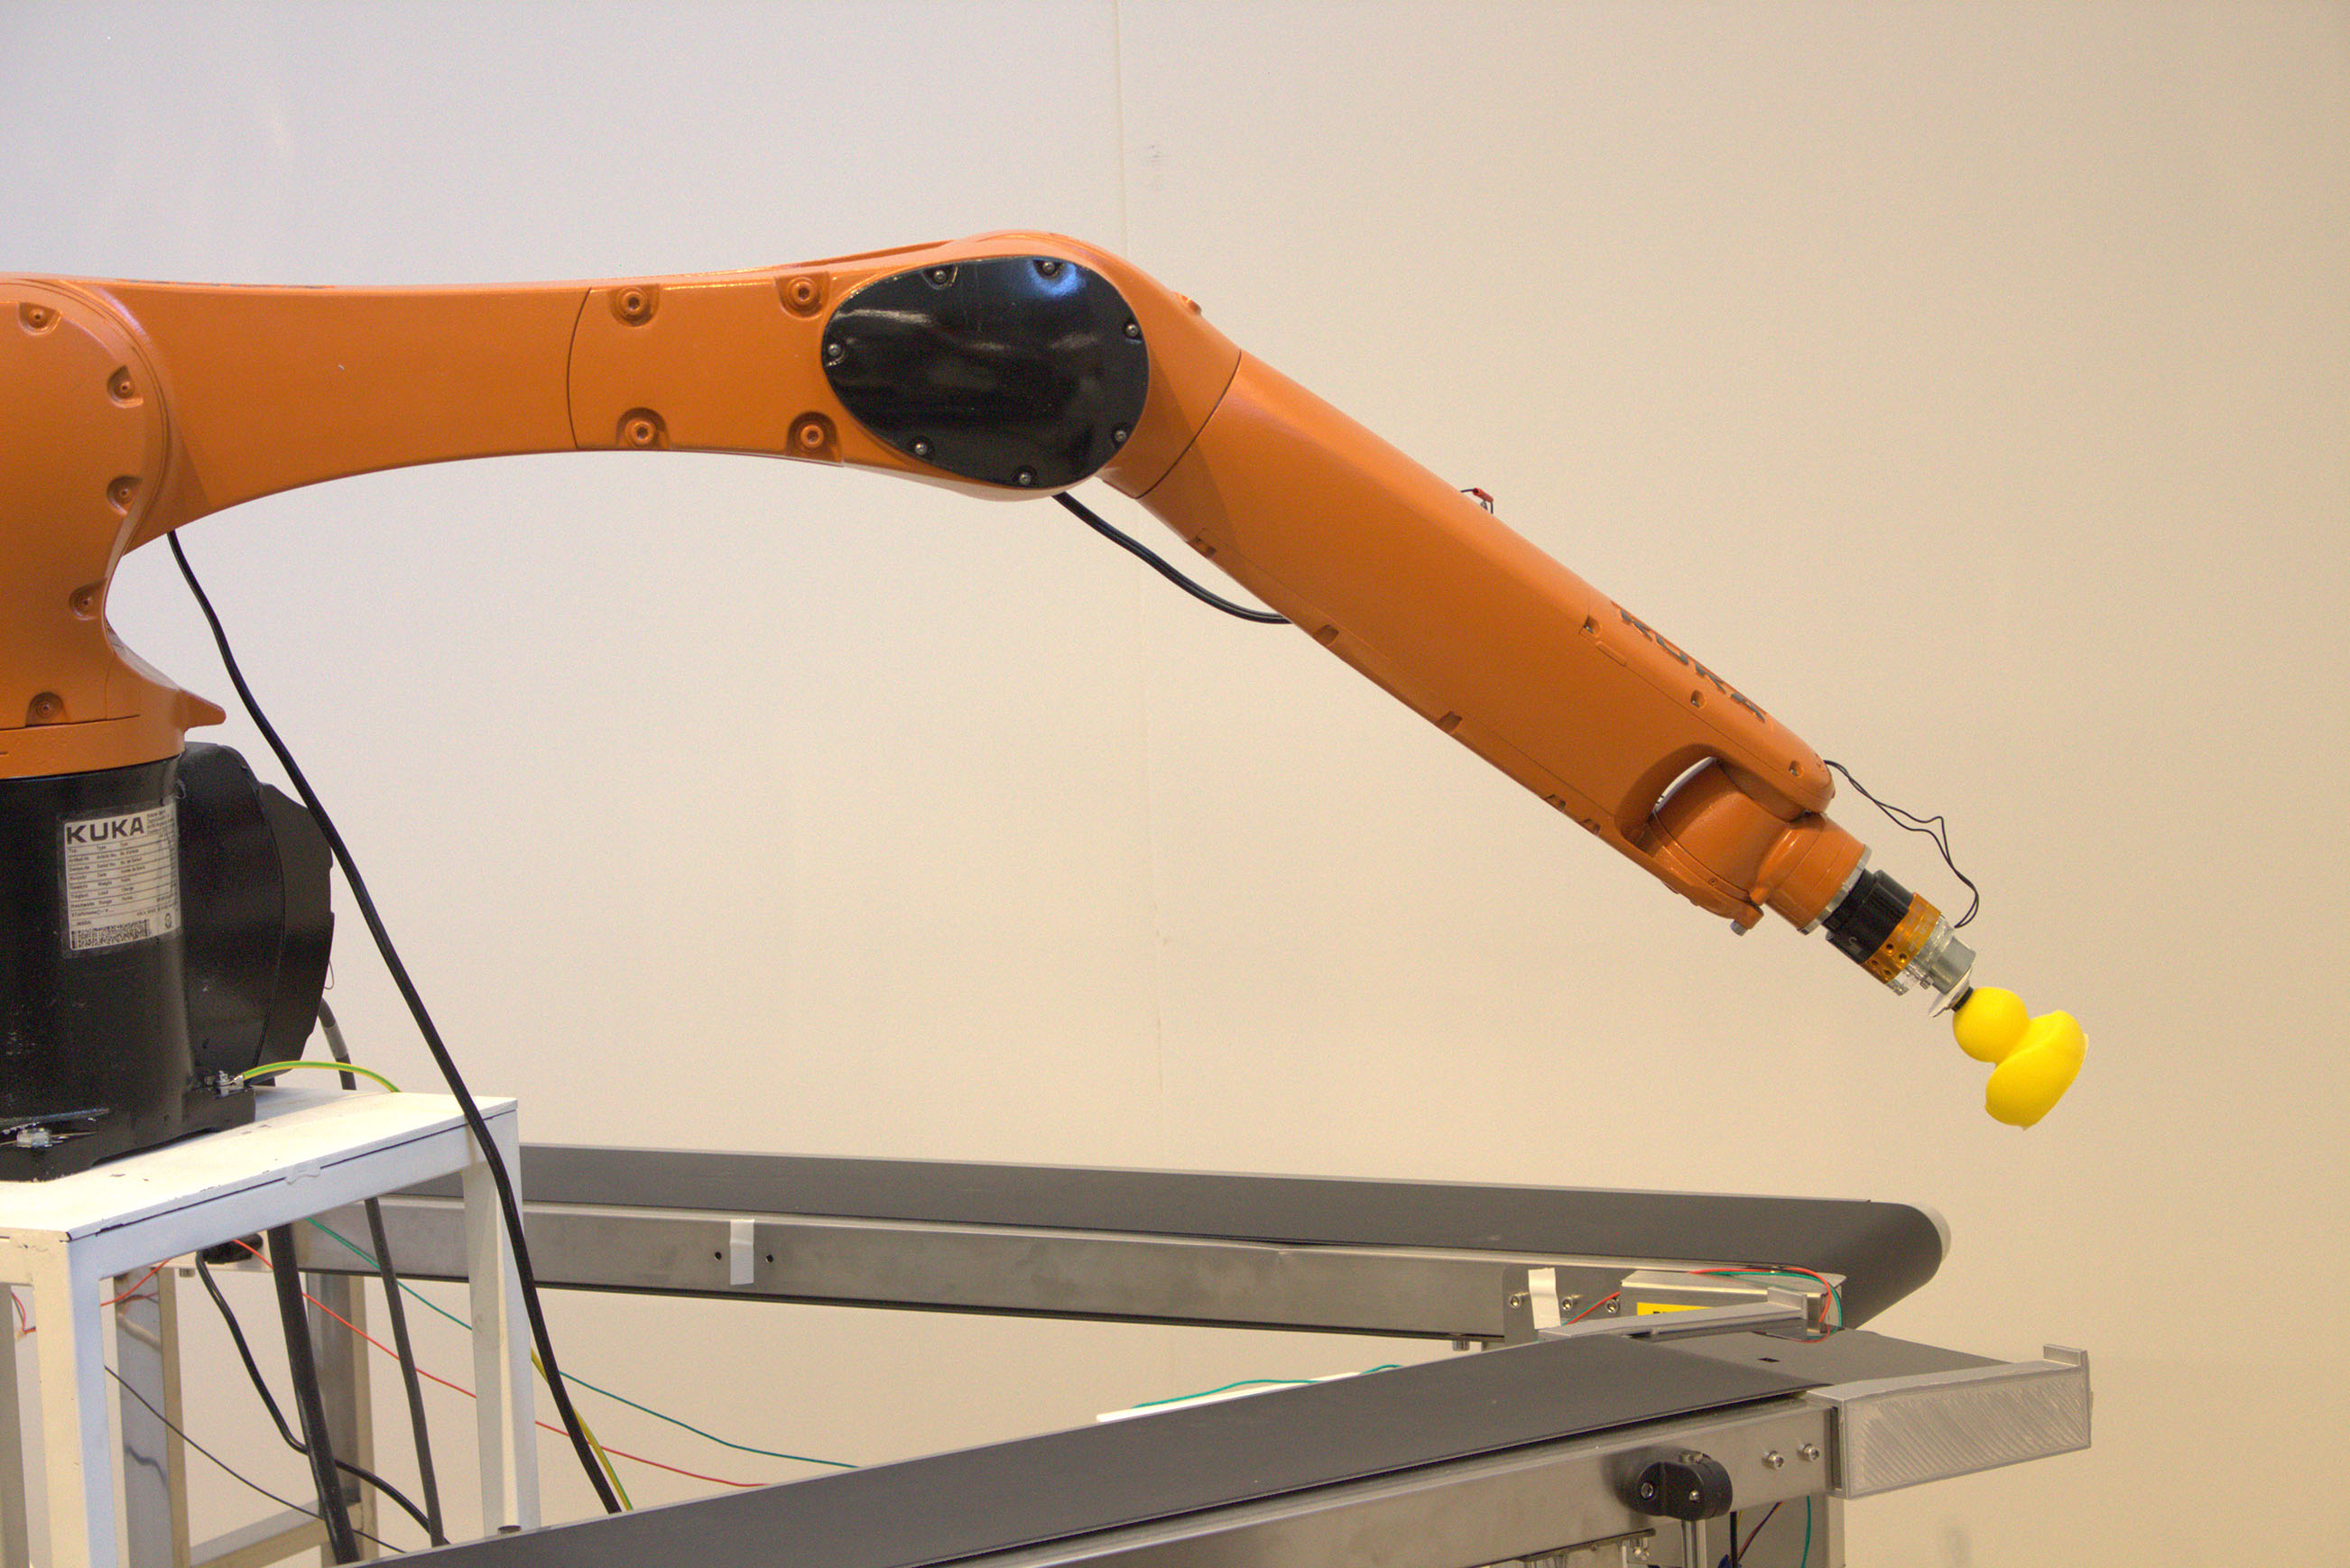 An orange robotic arm is extended and holding a yellow rubber duck over conveyor belts.